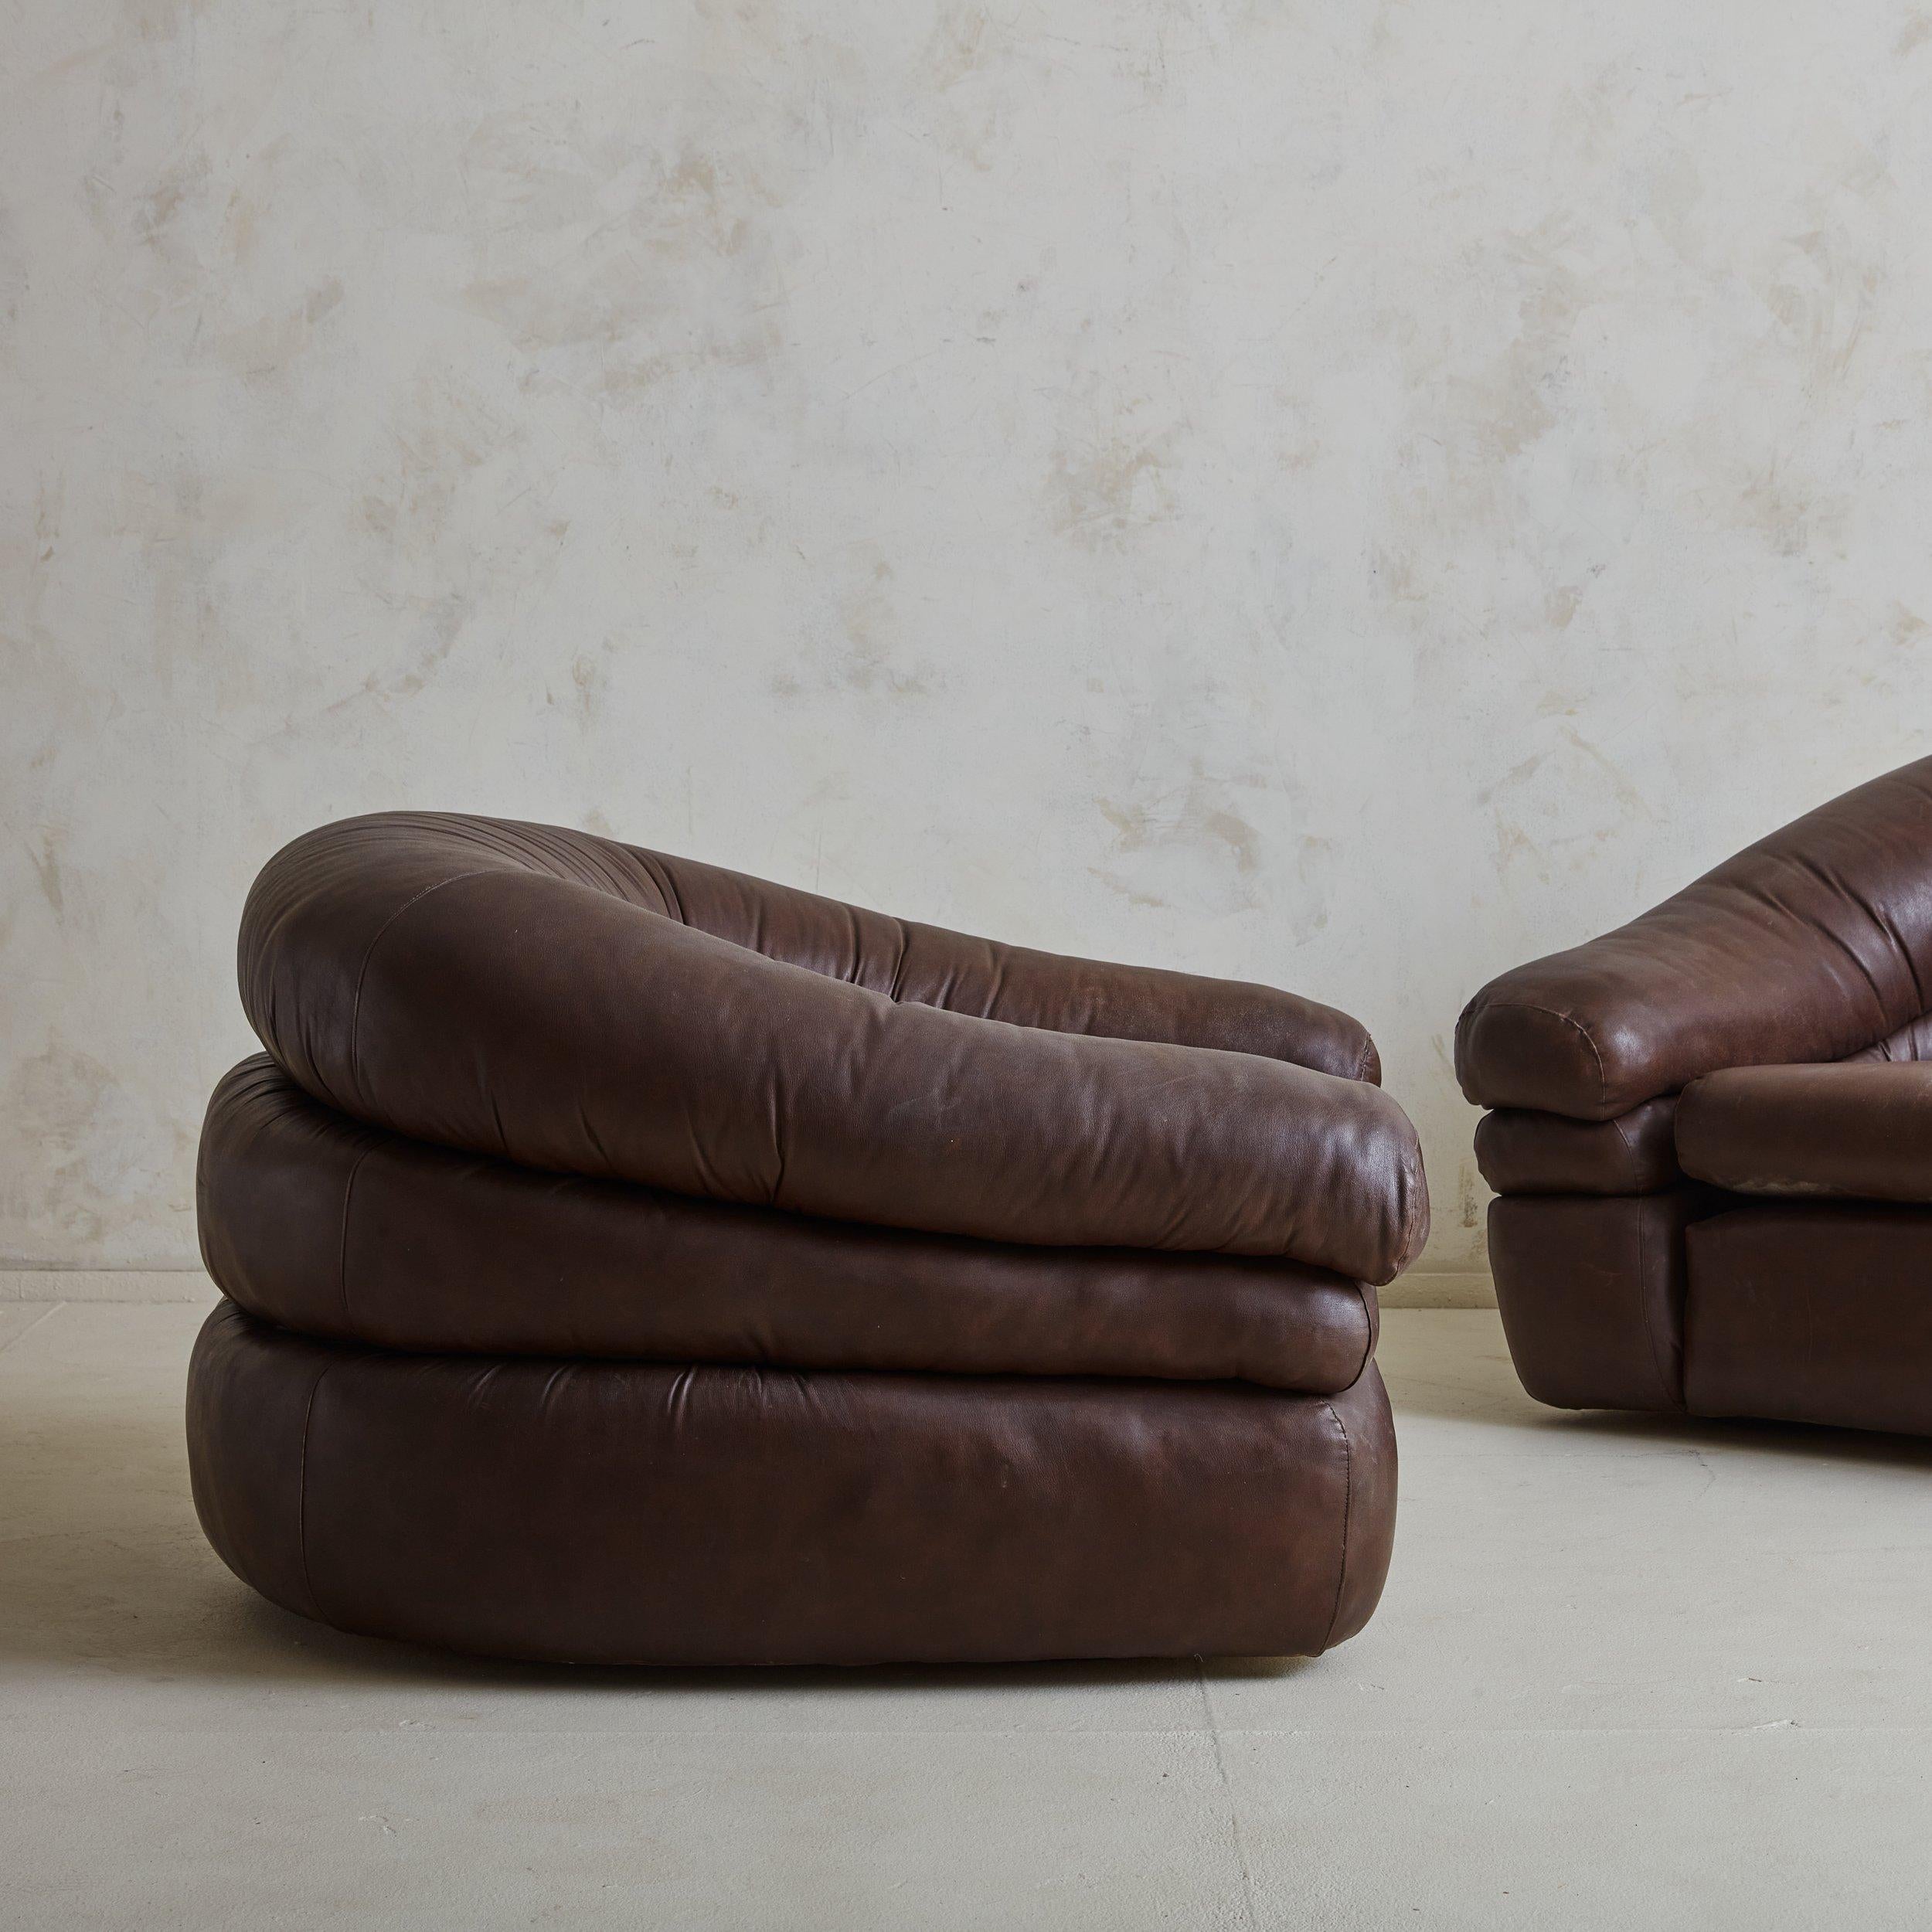 Pair of Large Brown Leather Lounge Chairs by de Pas, D’Urbino & Lomazzi, Italy For Sale 1